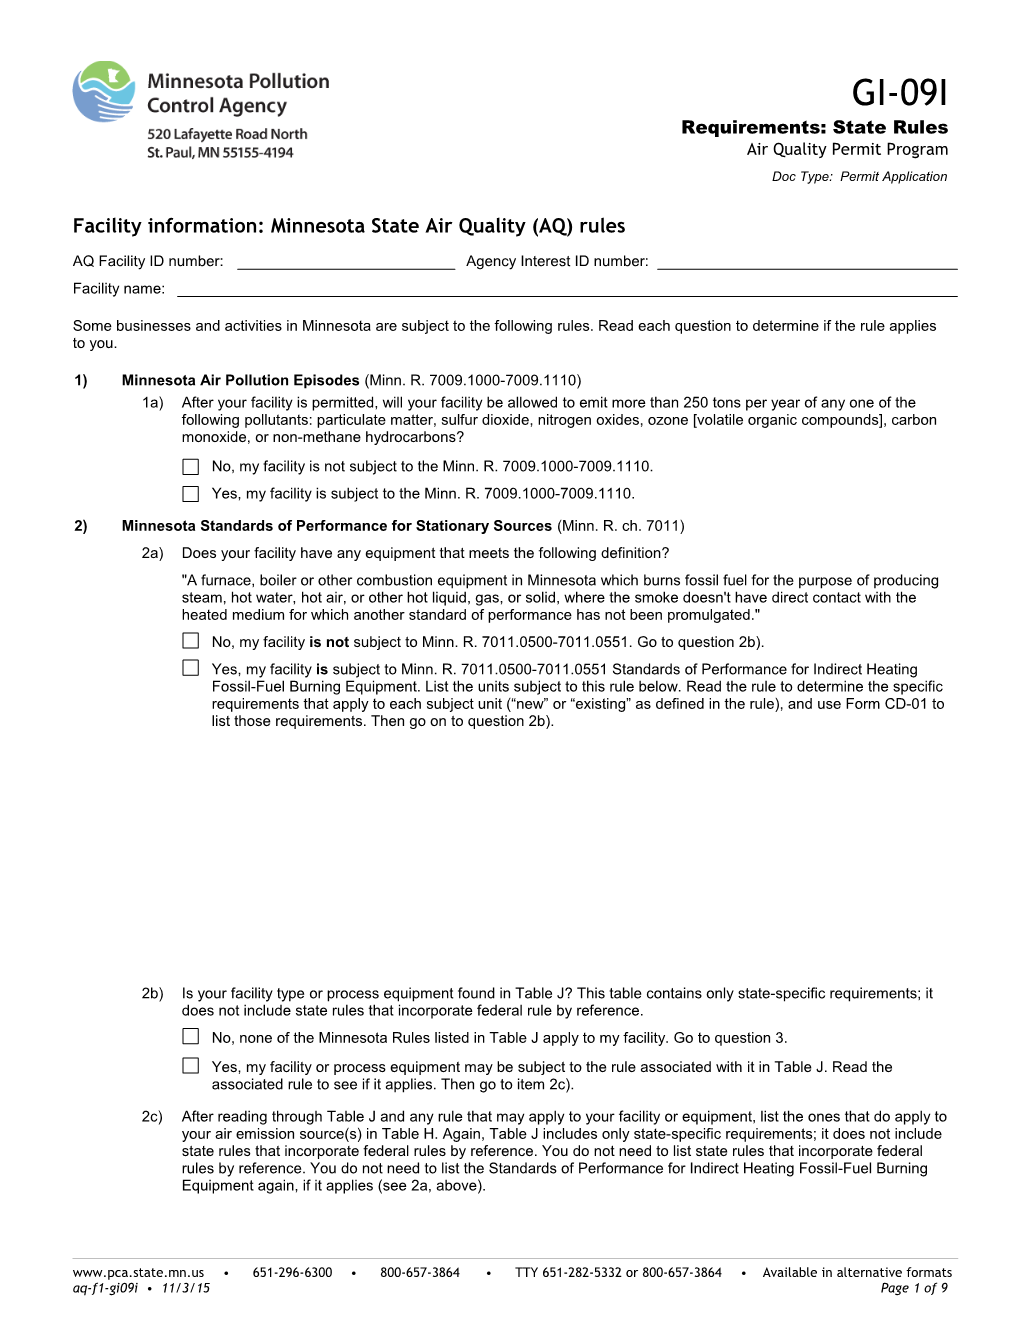 GI-09I Requirements State Rules - Air Quality Permit Program - Form